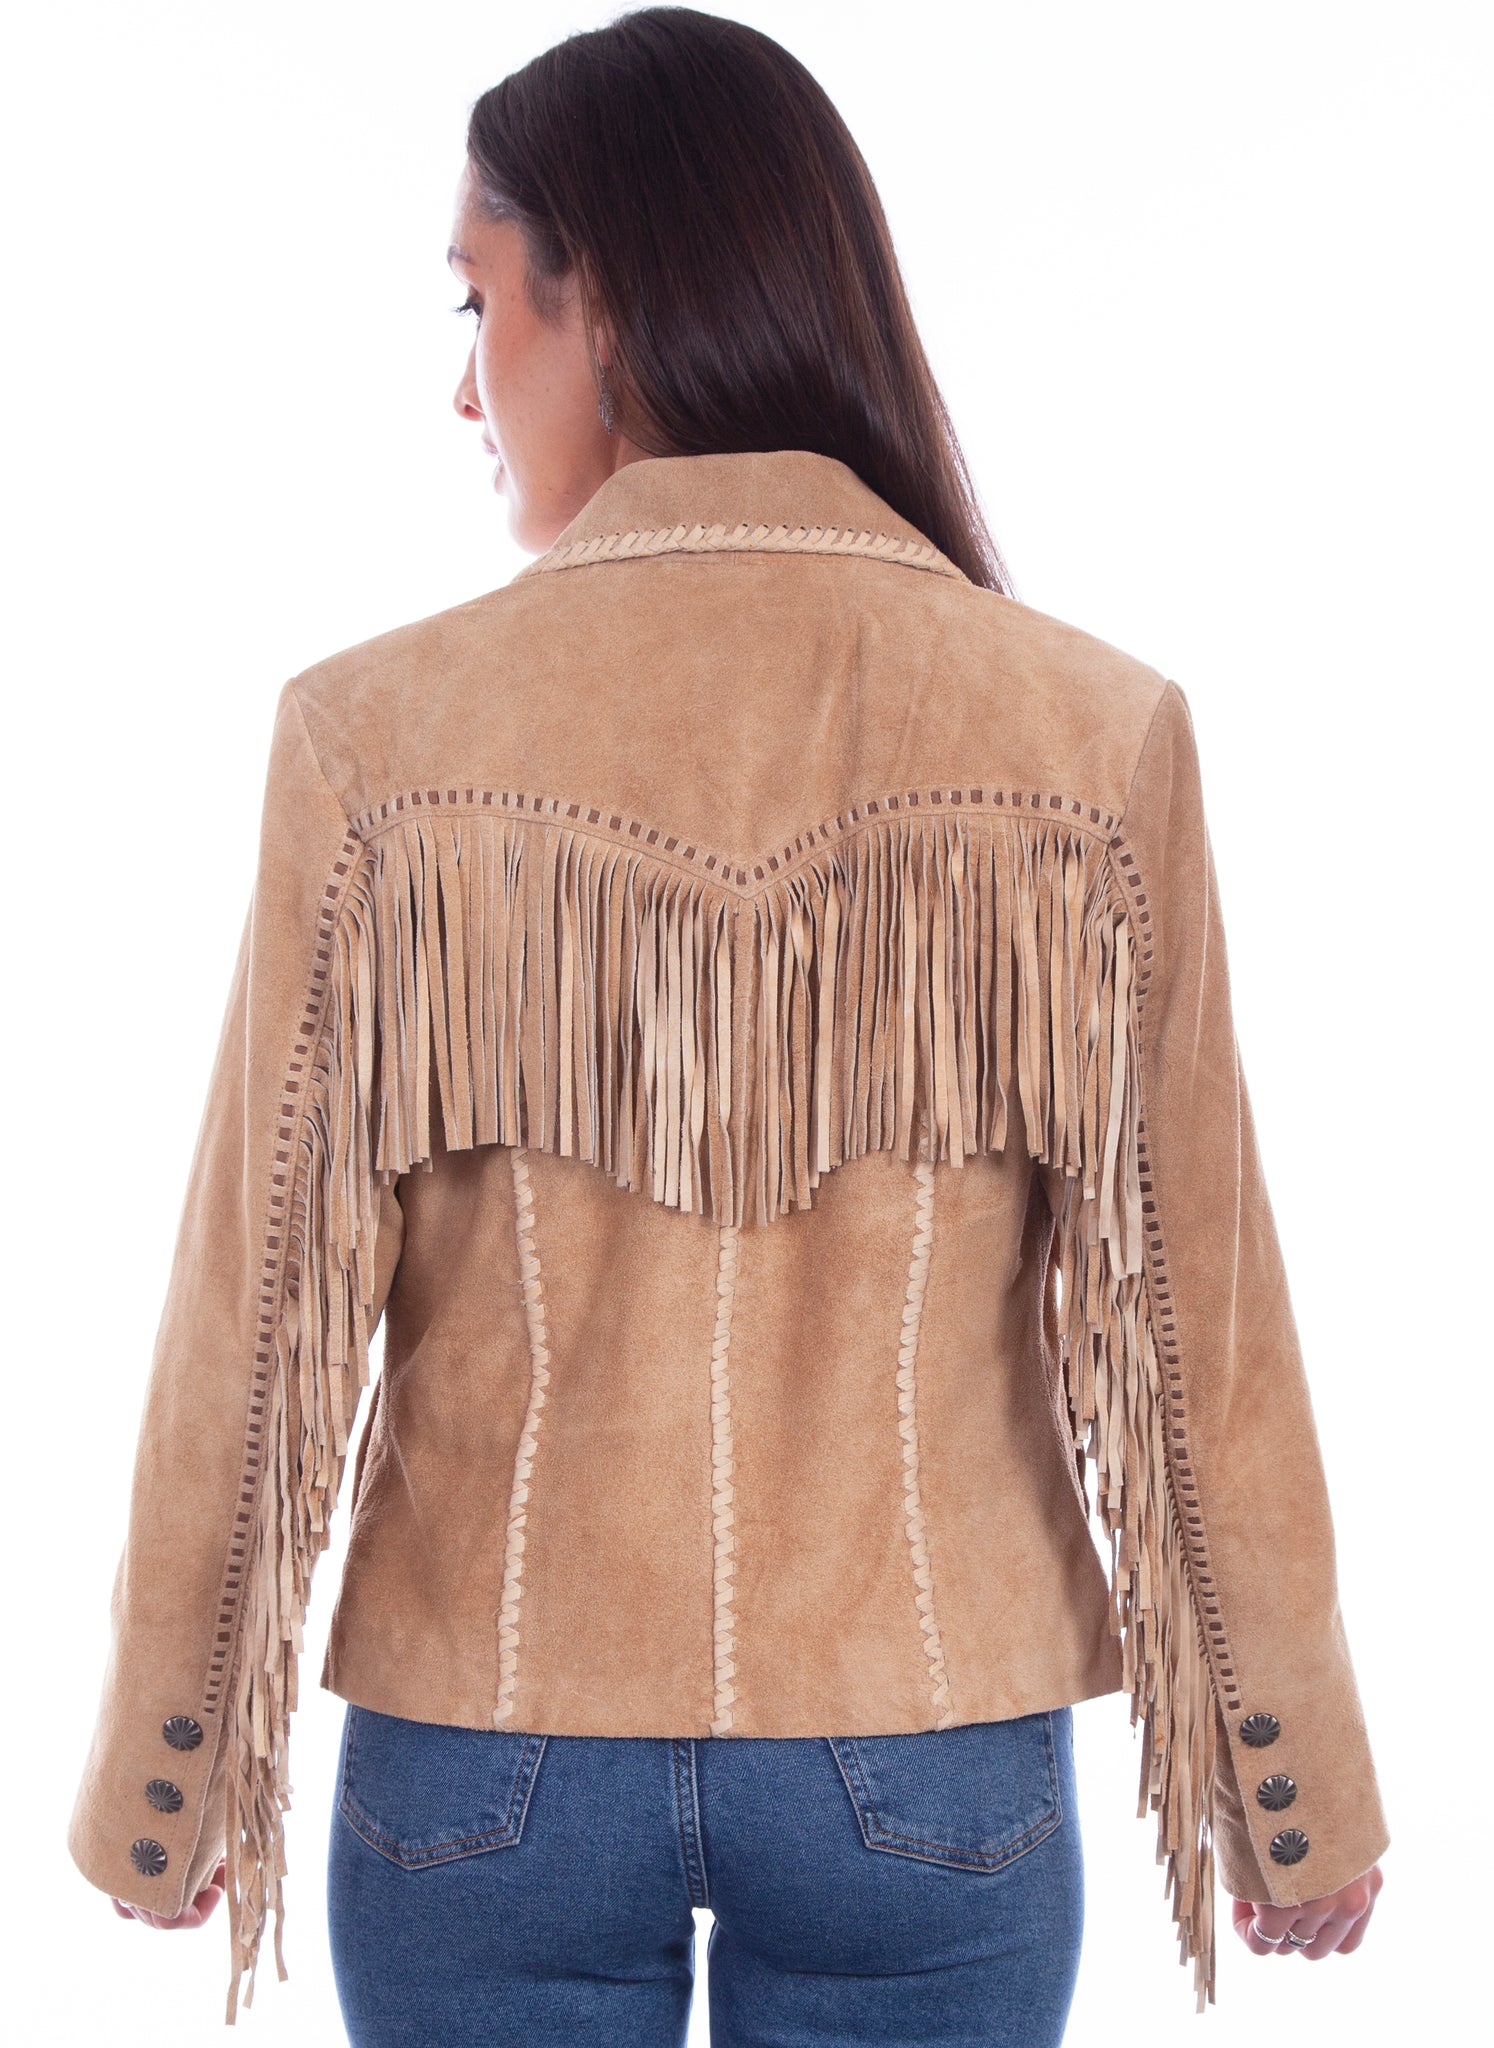 Jacket, Suede Leather Jacket with Fringe, Four Colors - Style L1080 –  Memphis Grand®